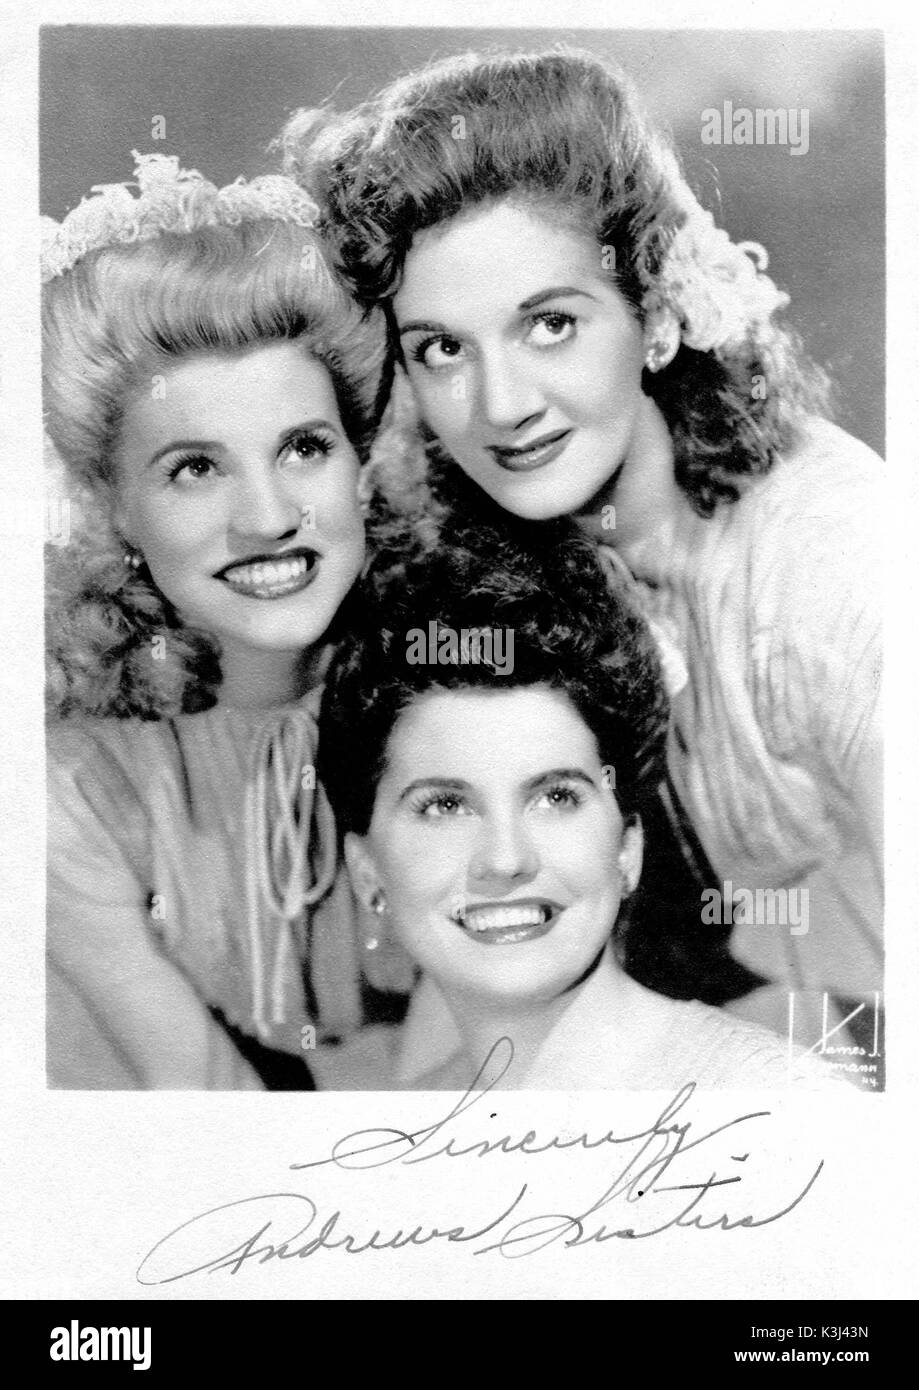 ANDREWS SISTERS Actresses, Singers, Performing Group PATTY ANDREWS (1918 - 2013) MAXINE ANDREWS LAVERNE ANDREWS [1911 -1967] Stock Photo